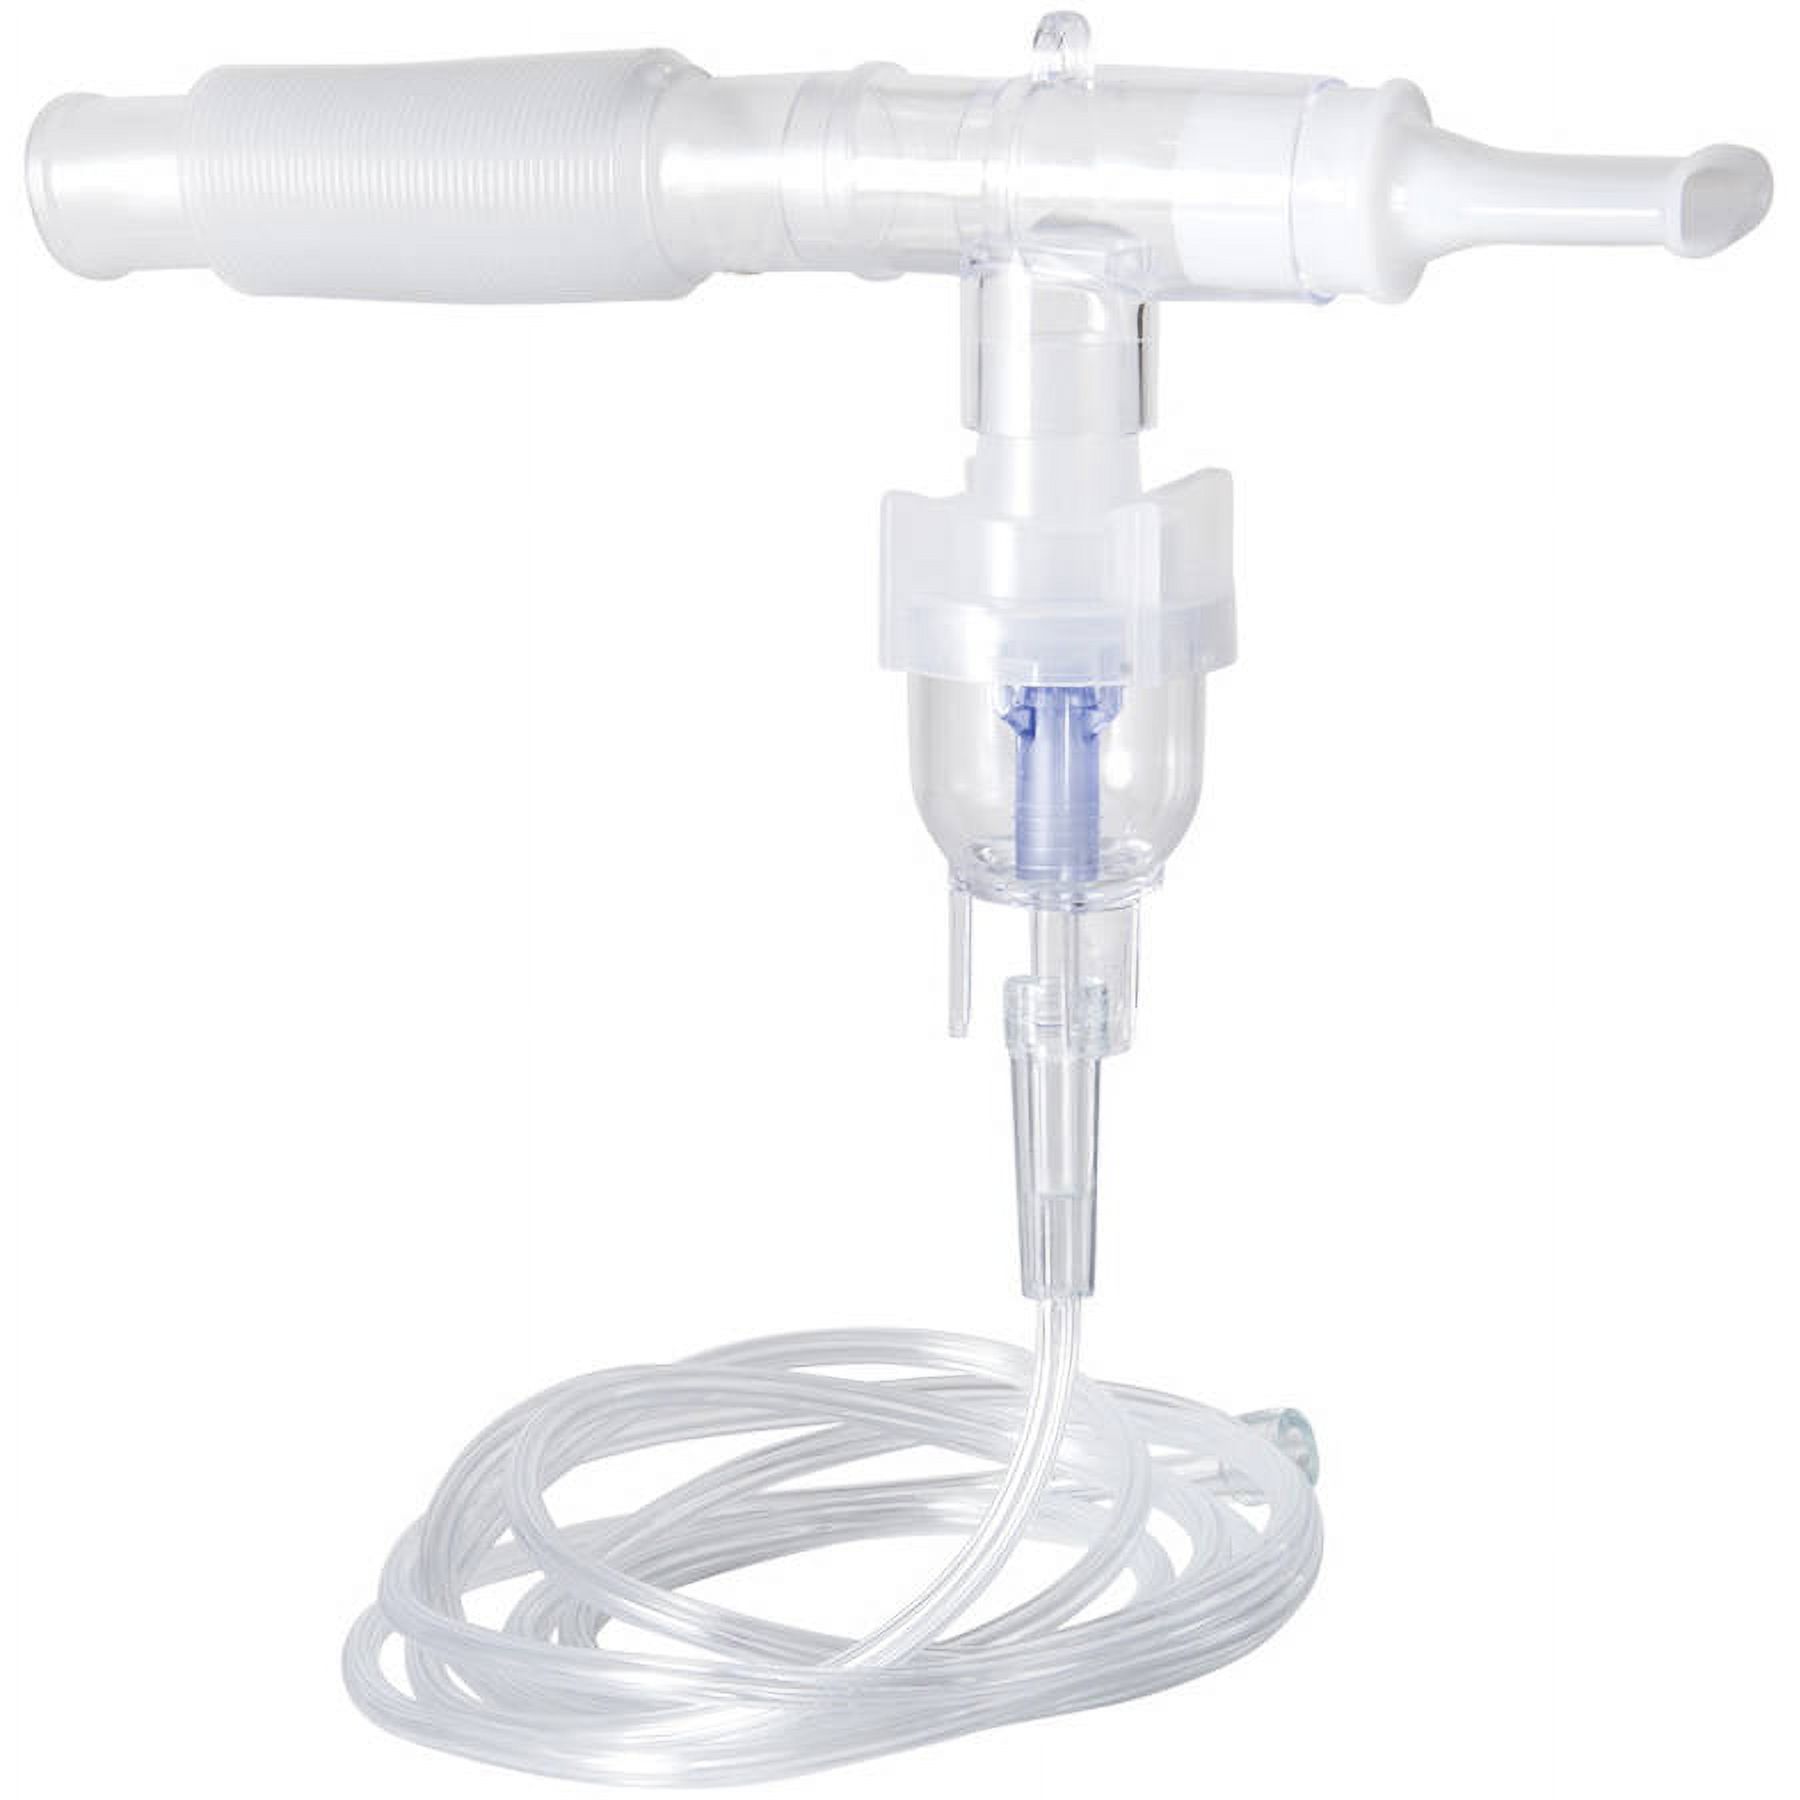 Nebulizer Replacement Parts and Accessories - image 2 of 2